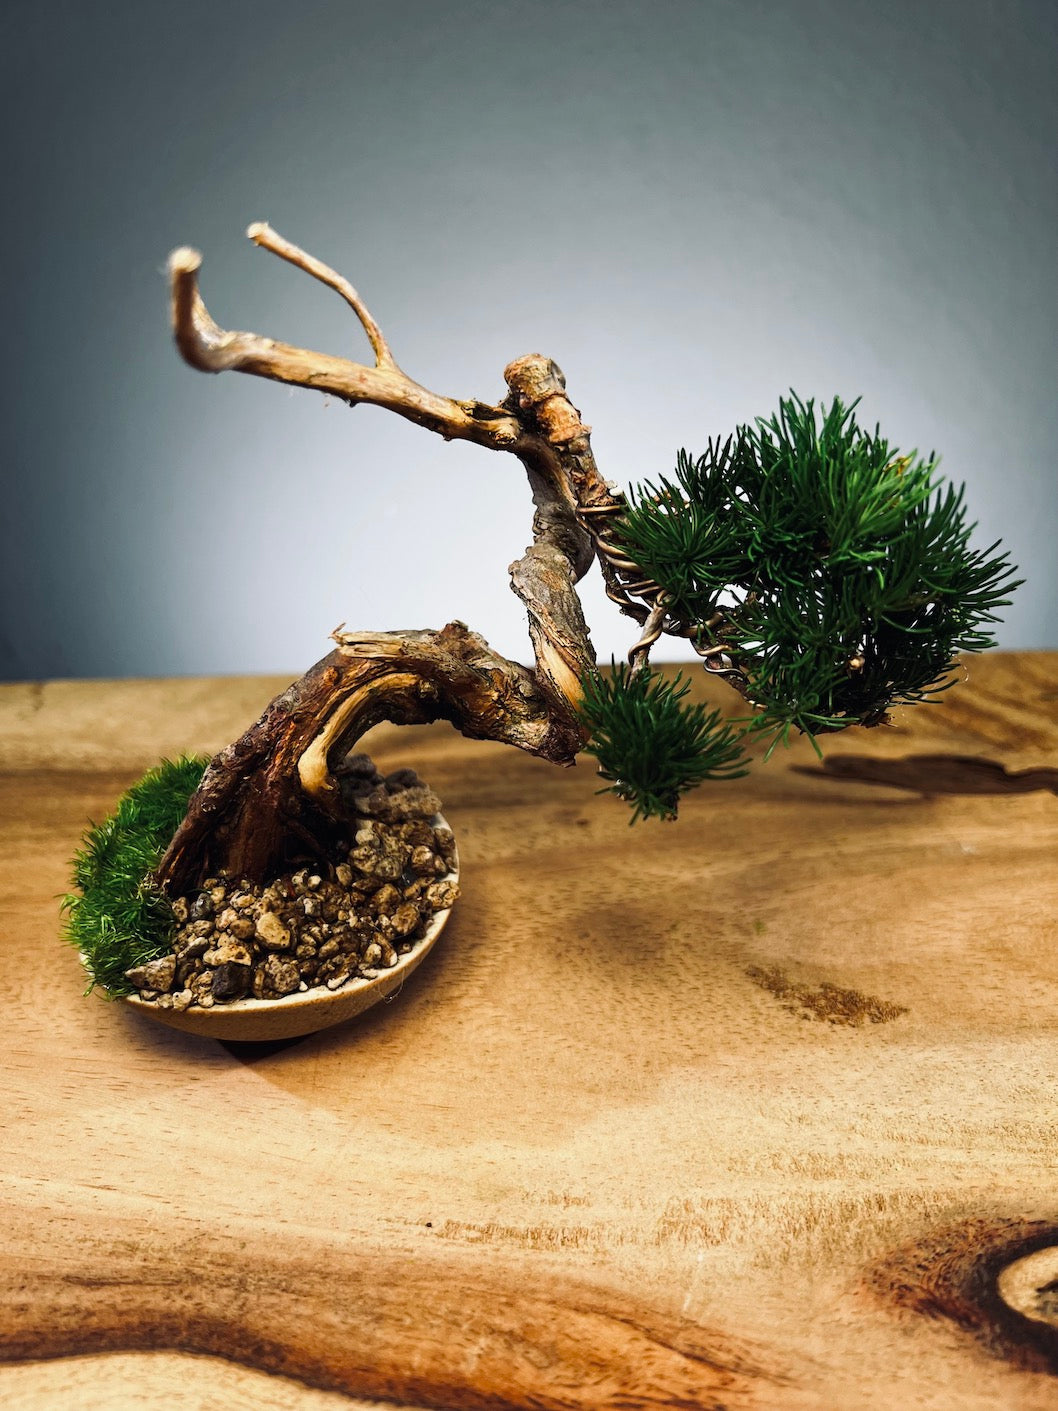 Juniper by the Winding Path - Atom (Preserved Plants)